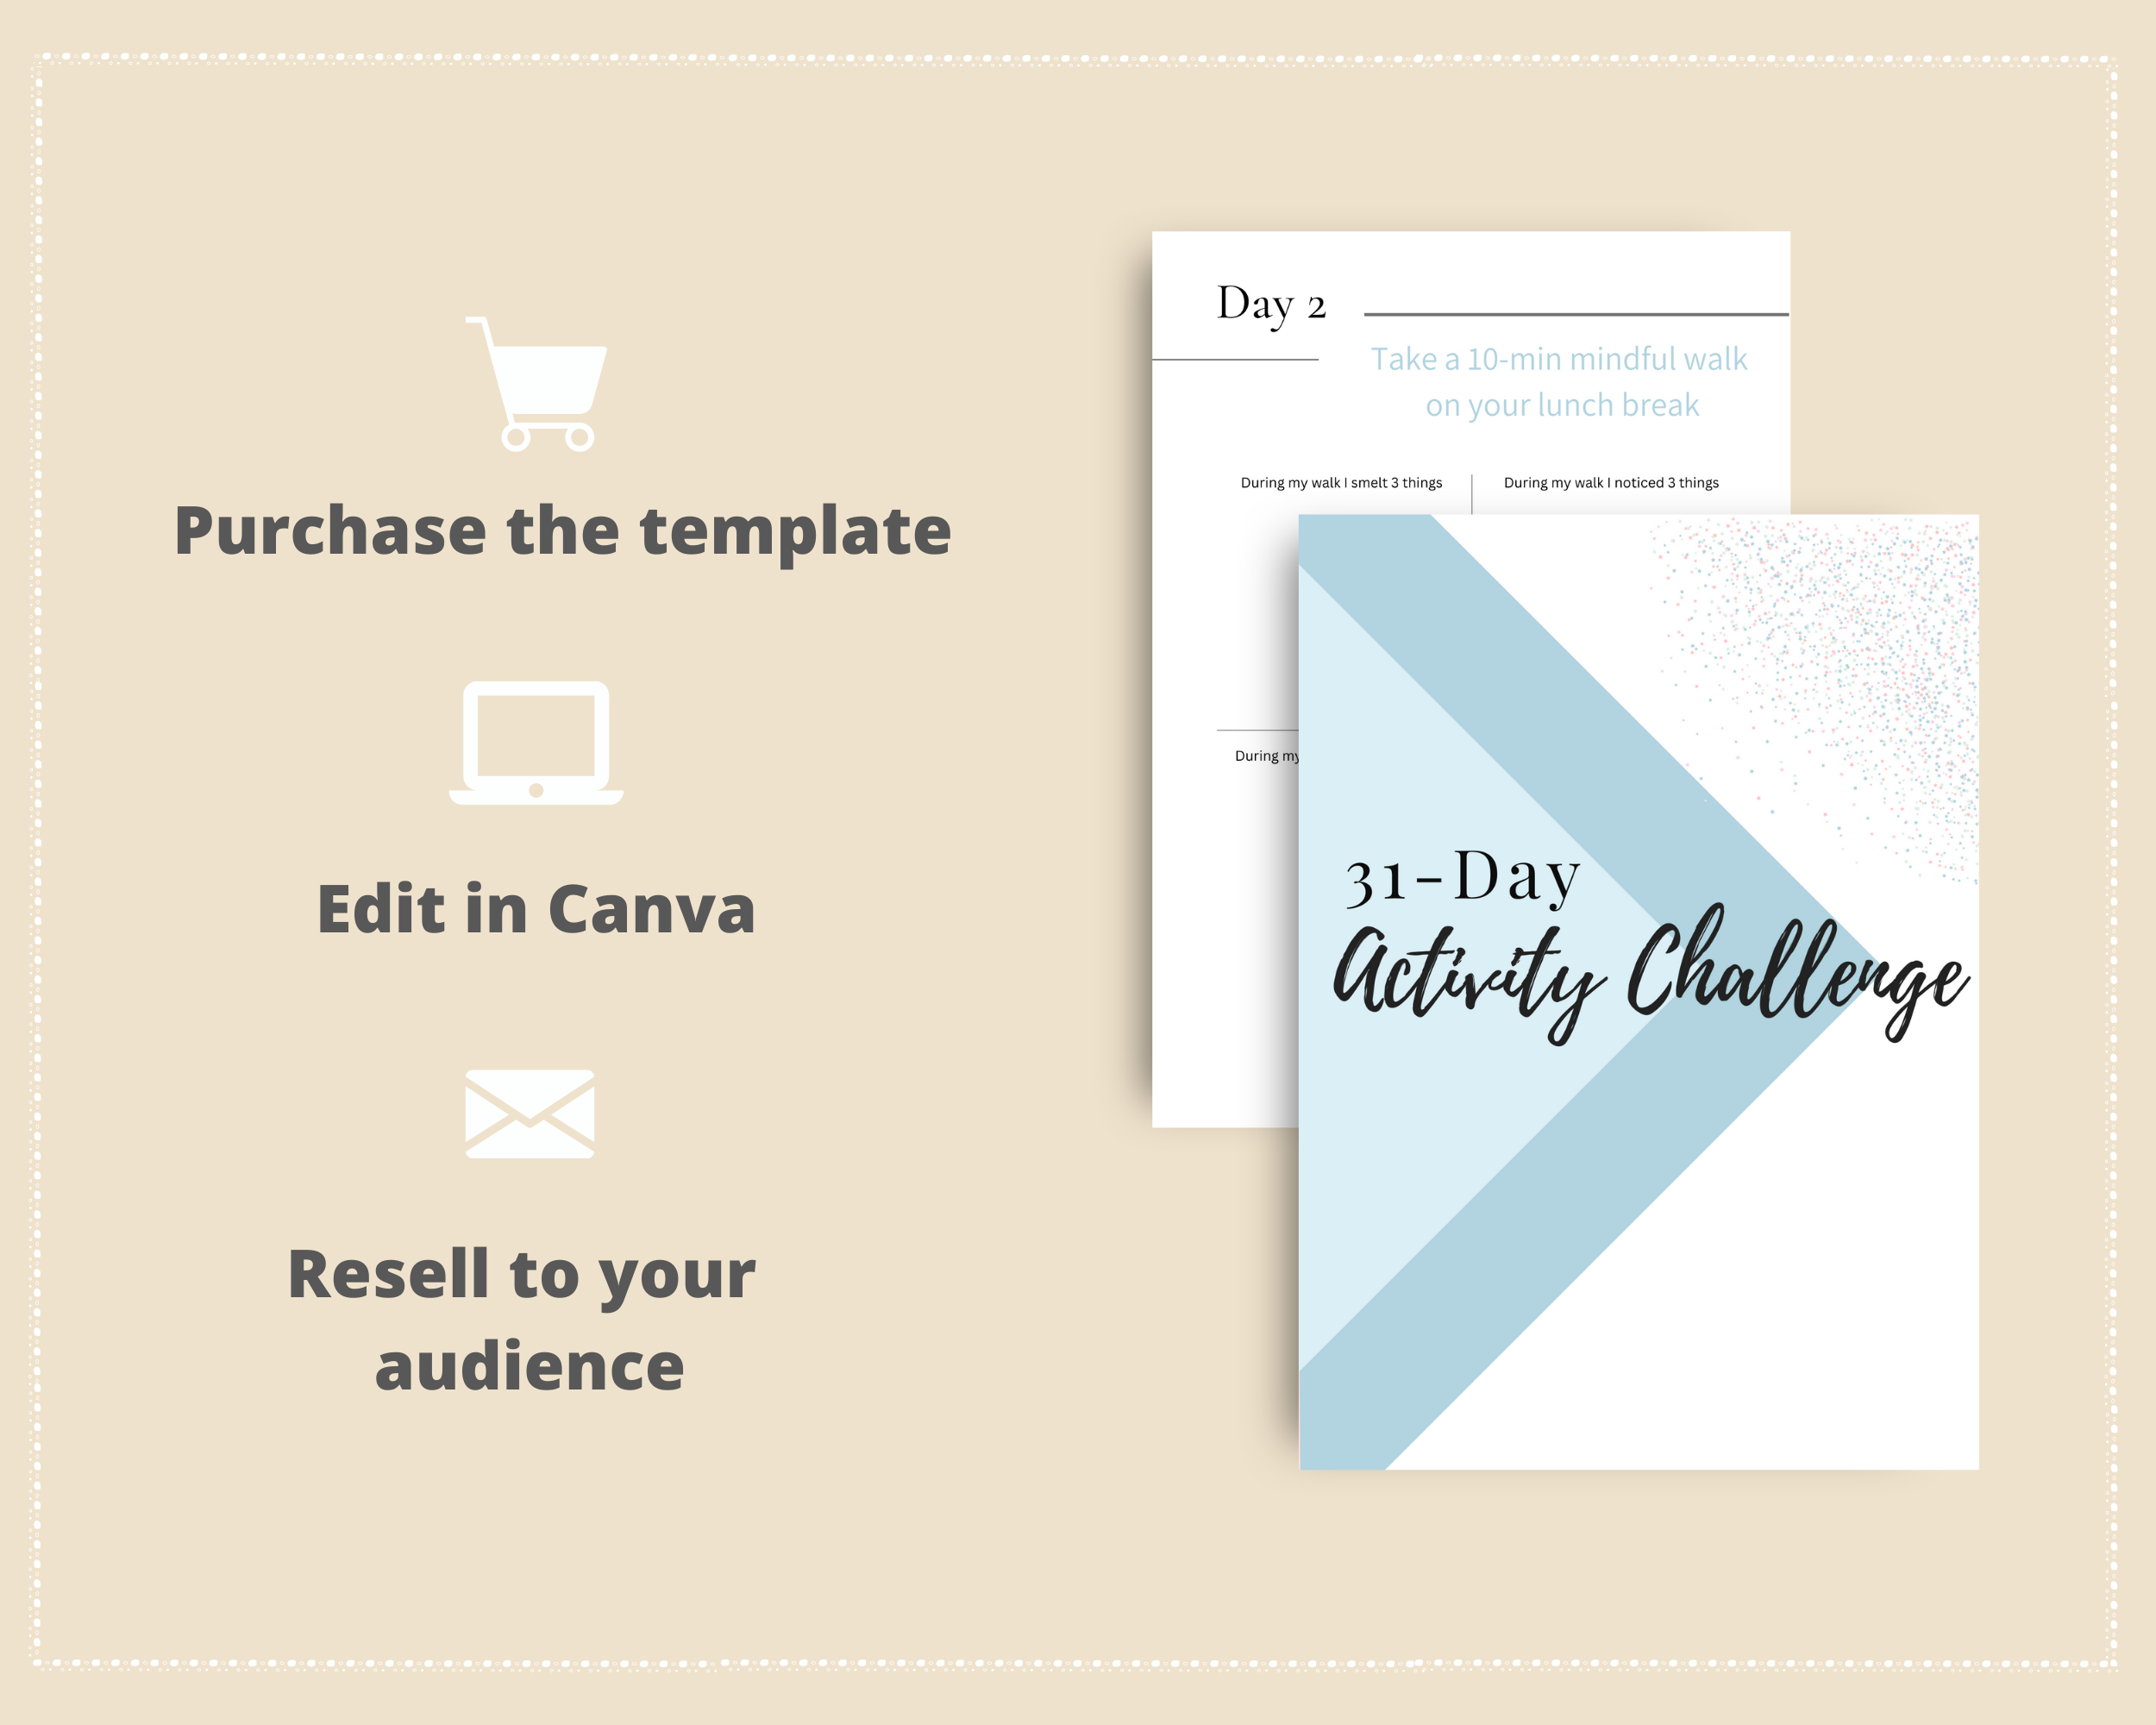 31-Day Activity Challenge | Editable Canva Template A4 Size